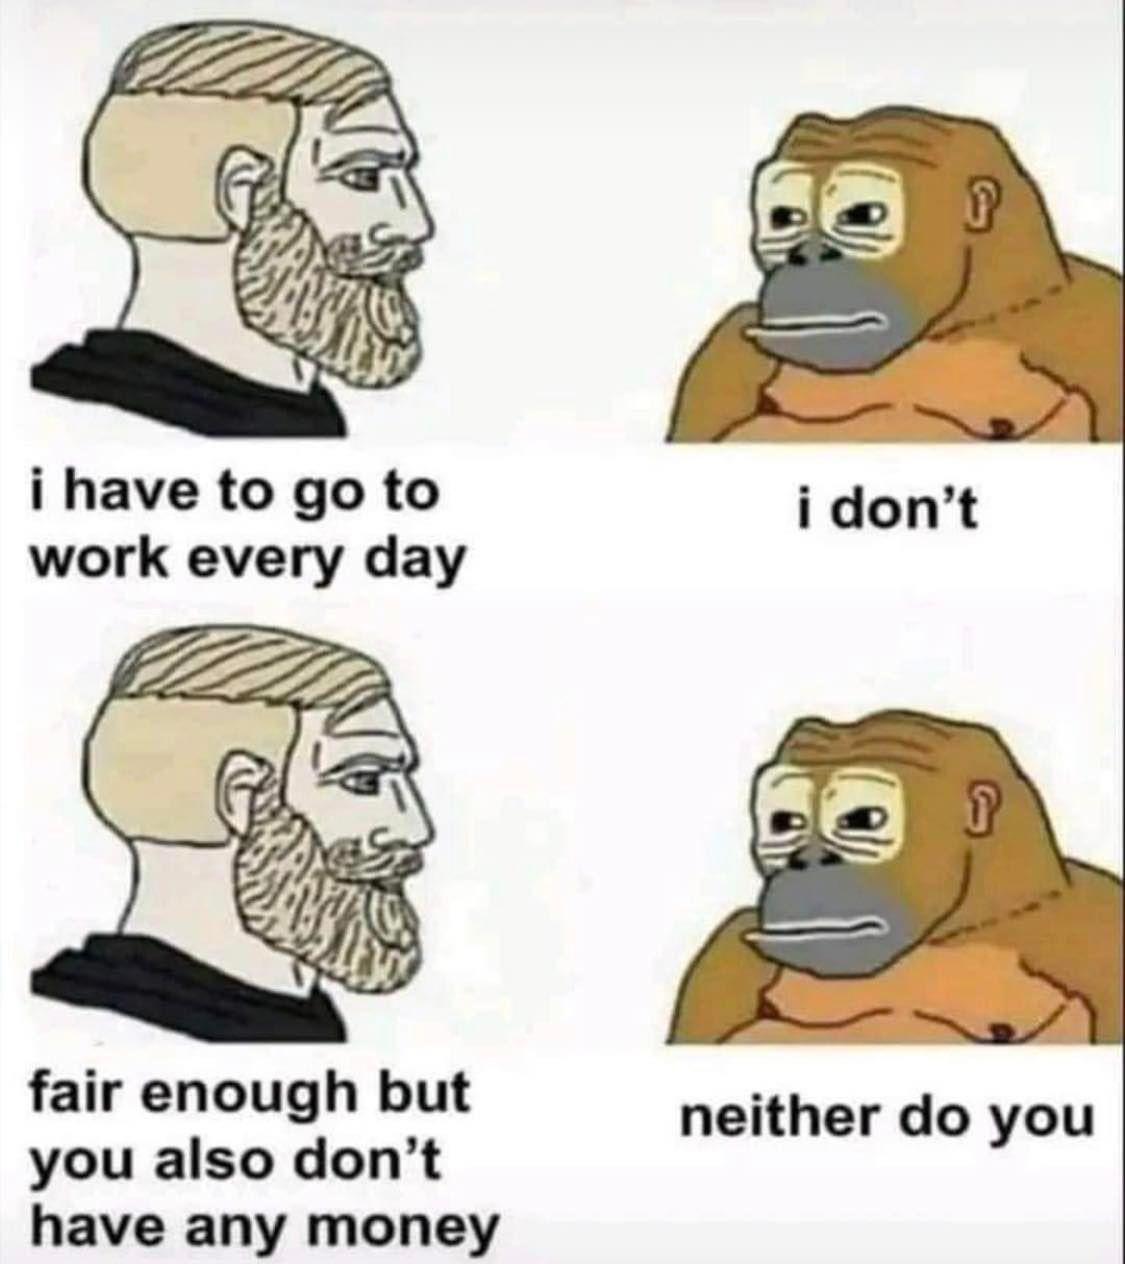 funny memes and pics  - meme monkey you dont have money - i have to go to work every day fair enough but you also don't have any money i don't neither do you